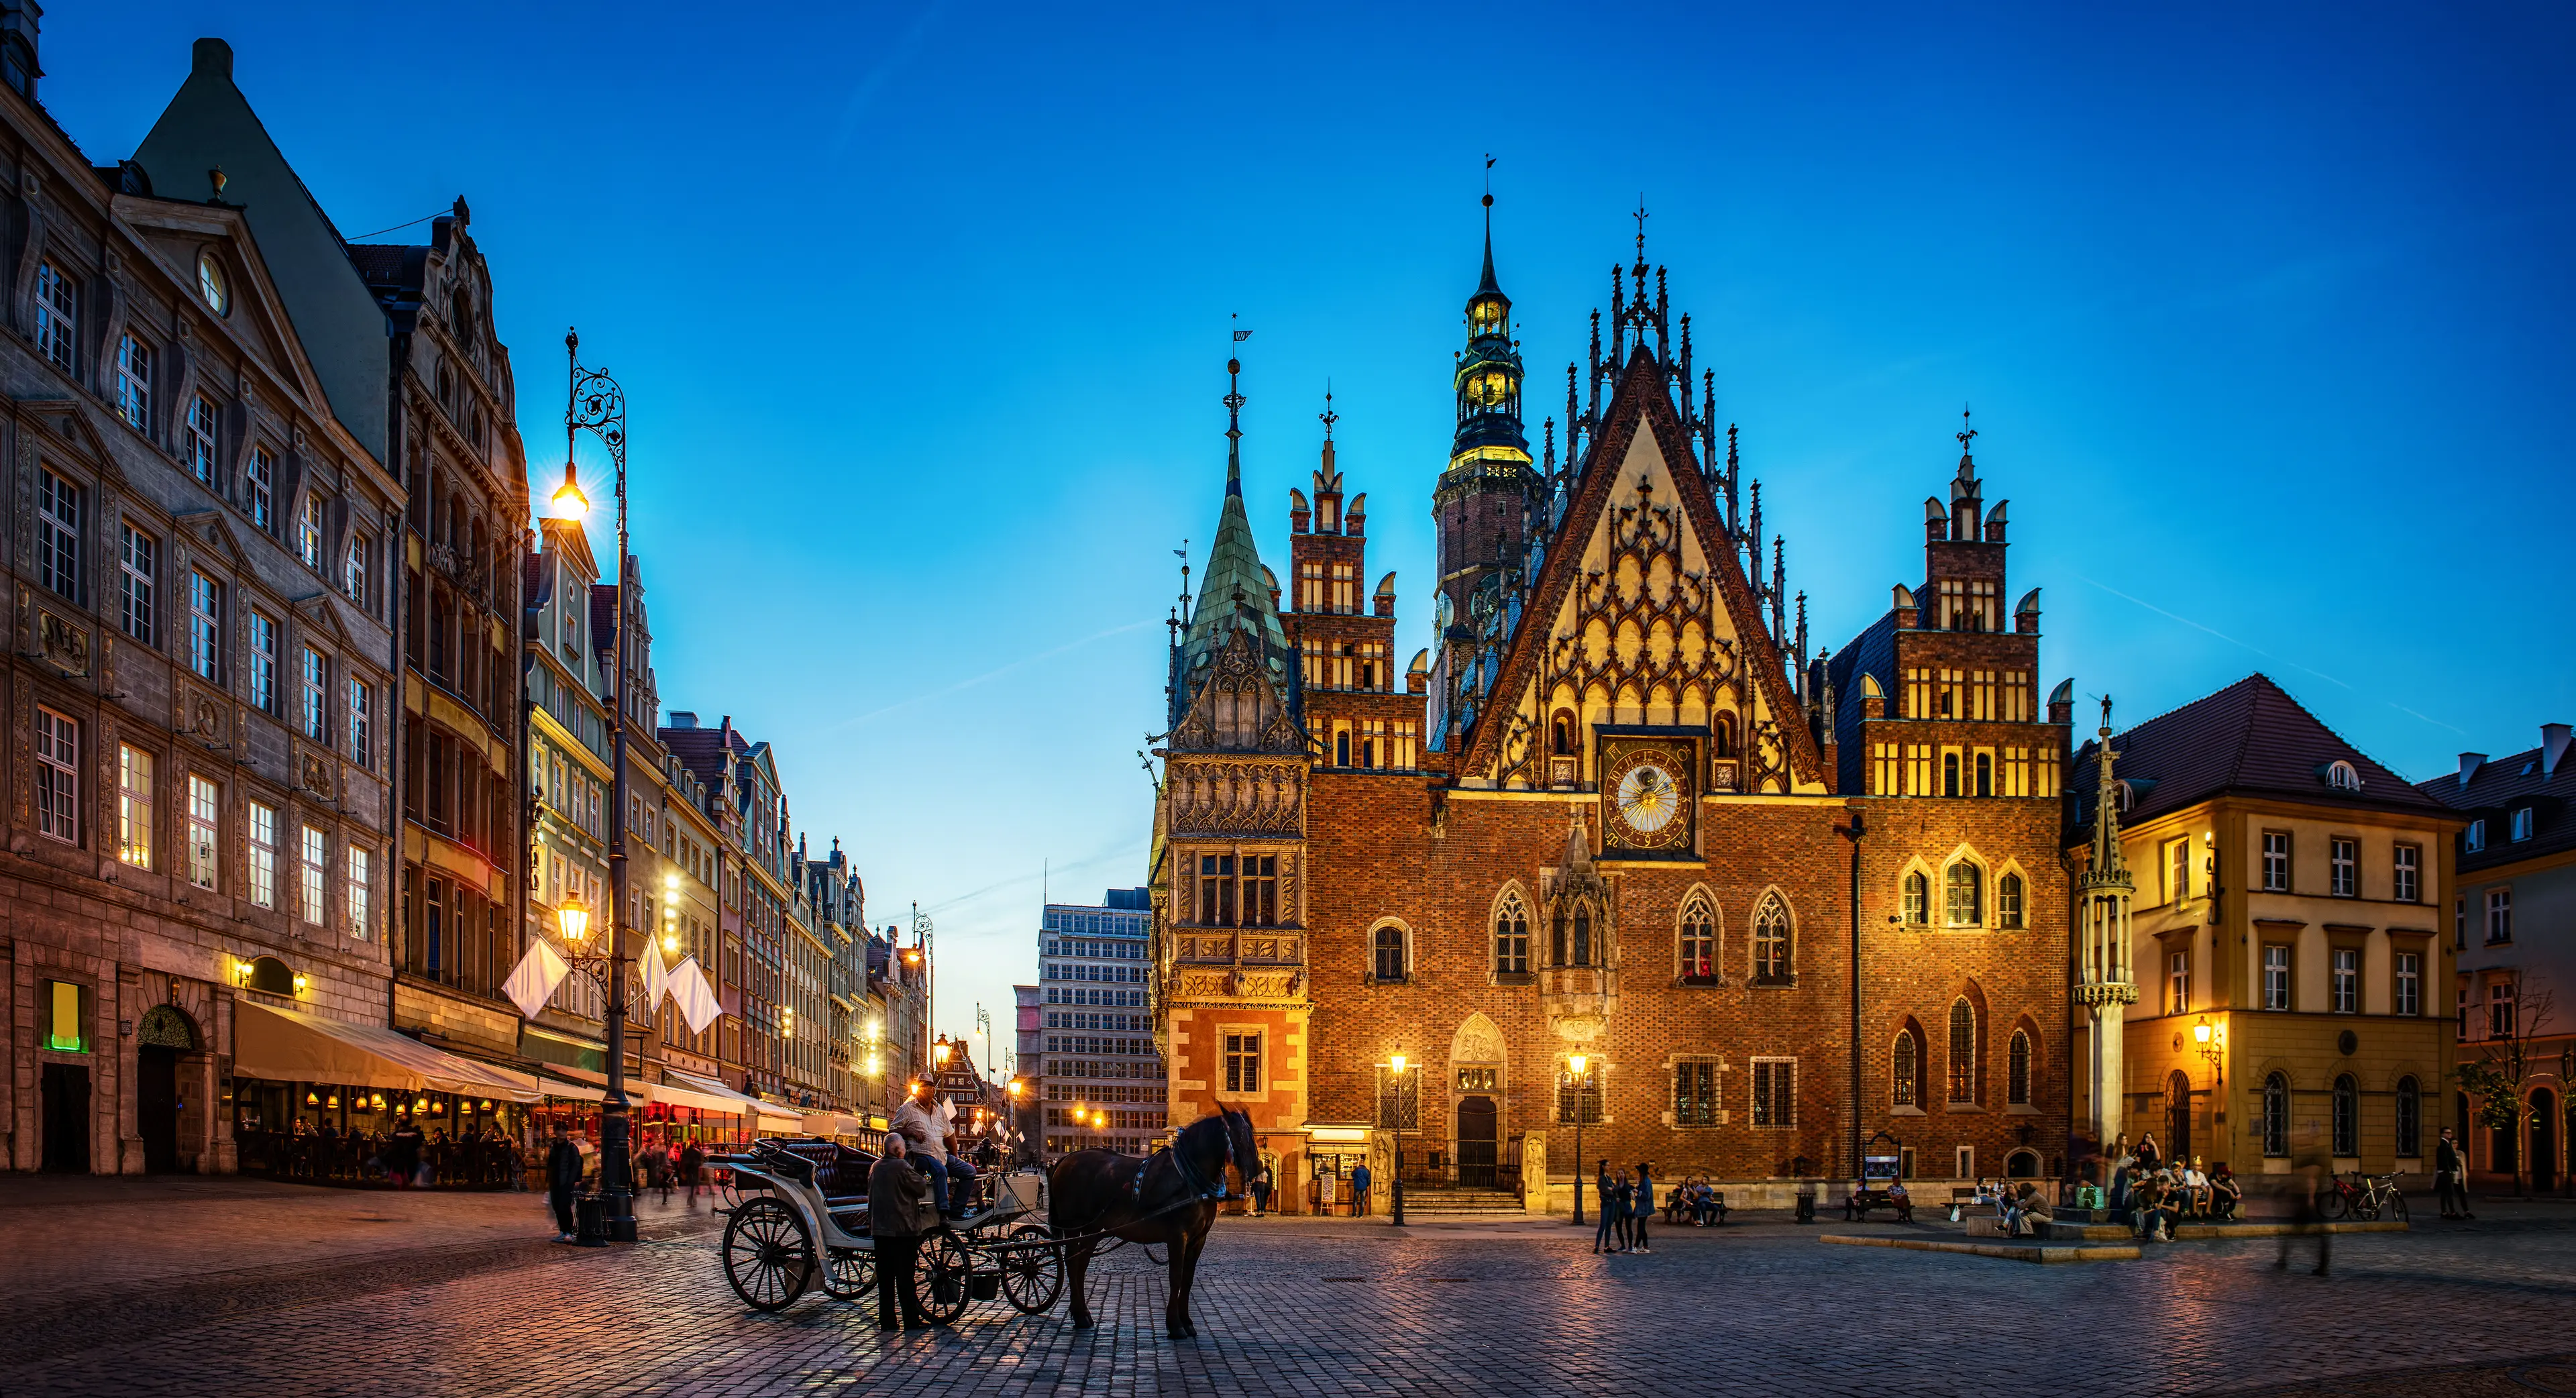 1-Day Solo Adventure: Wroclaw's Nightlife and Sightseeing Highlights